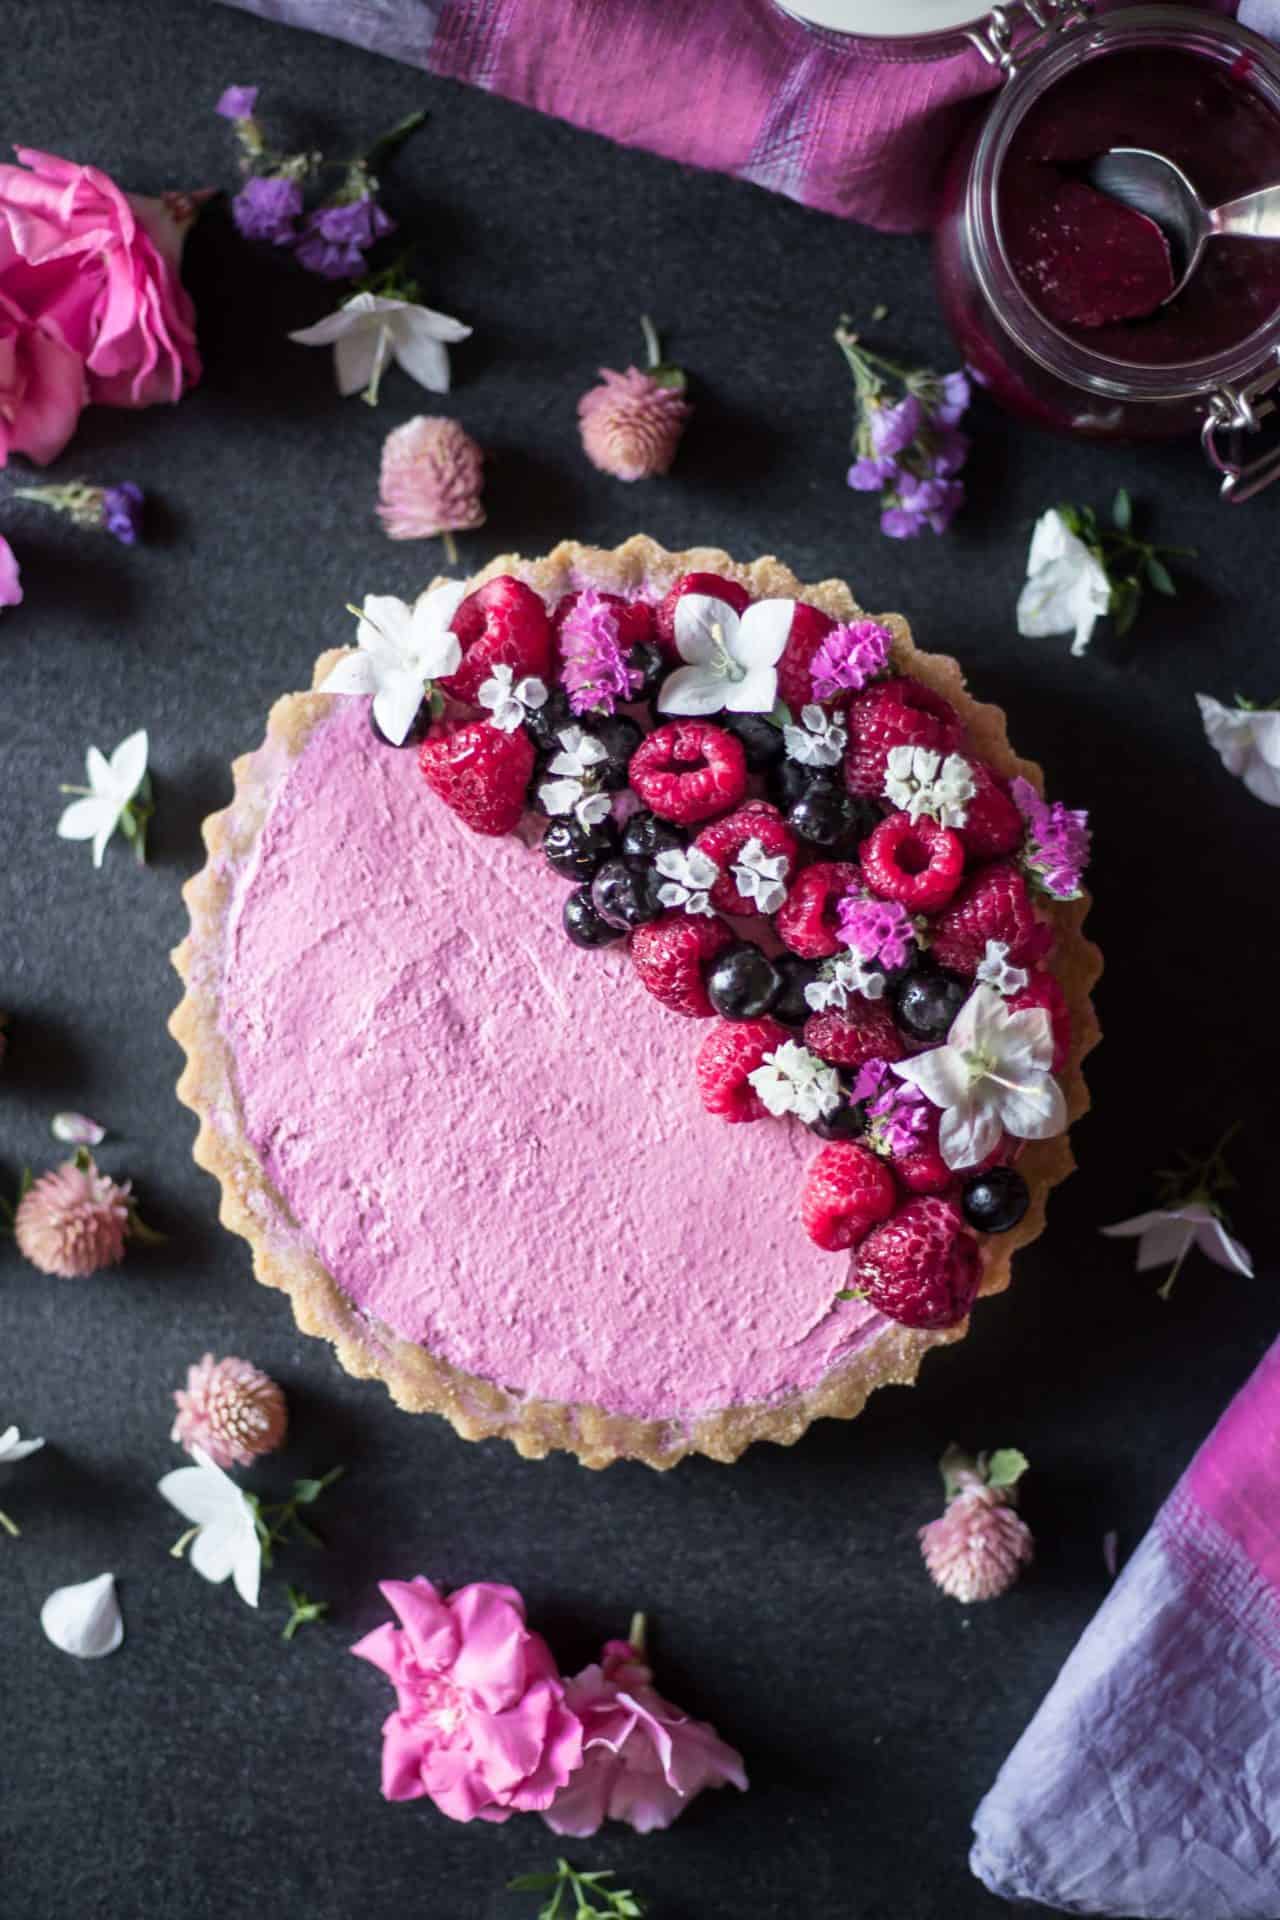 This Gluten-Free No-Bake Mixed Berry Tart is low FODMAP and lactose-free. It's flavorful, refreshing, perfectly sweetened with a super creamy texture.